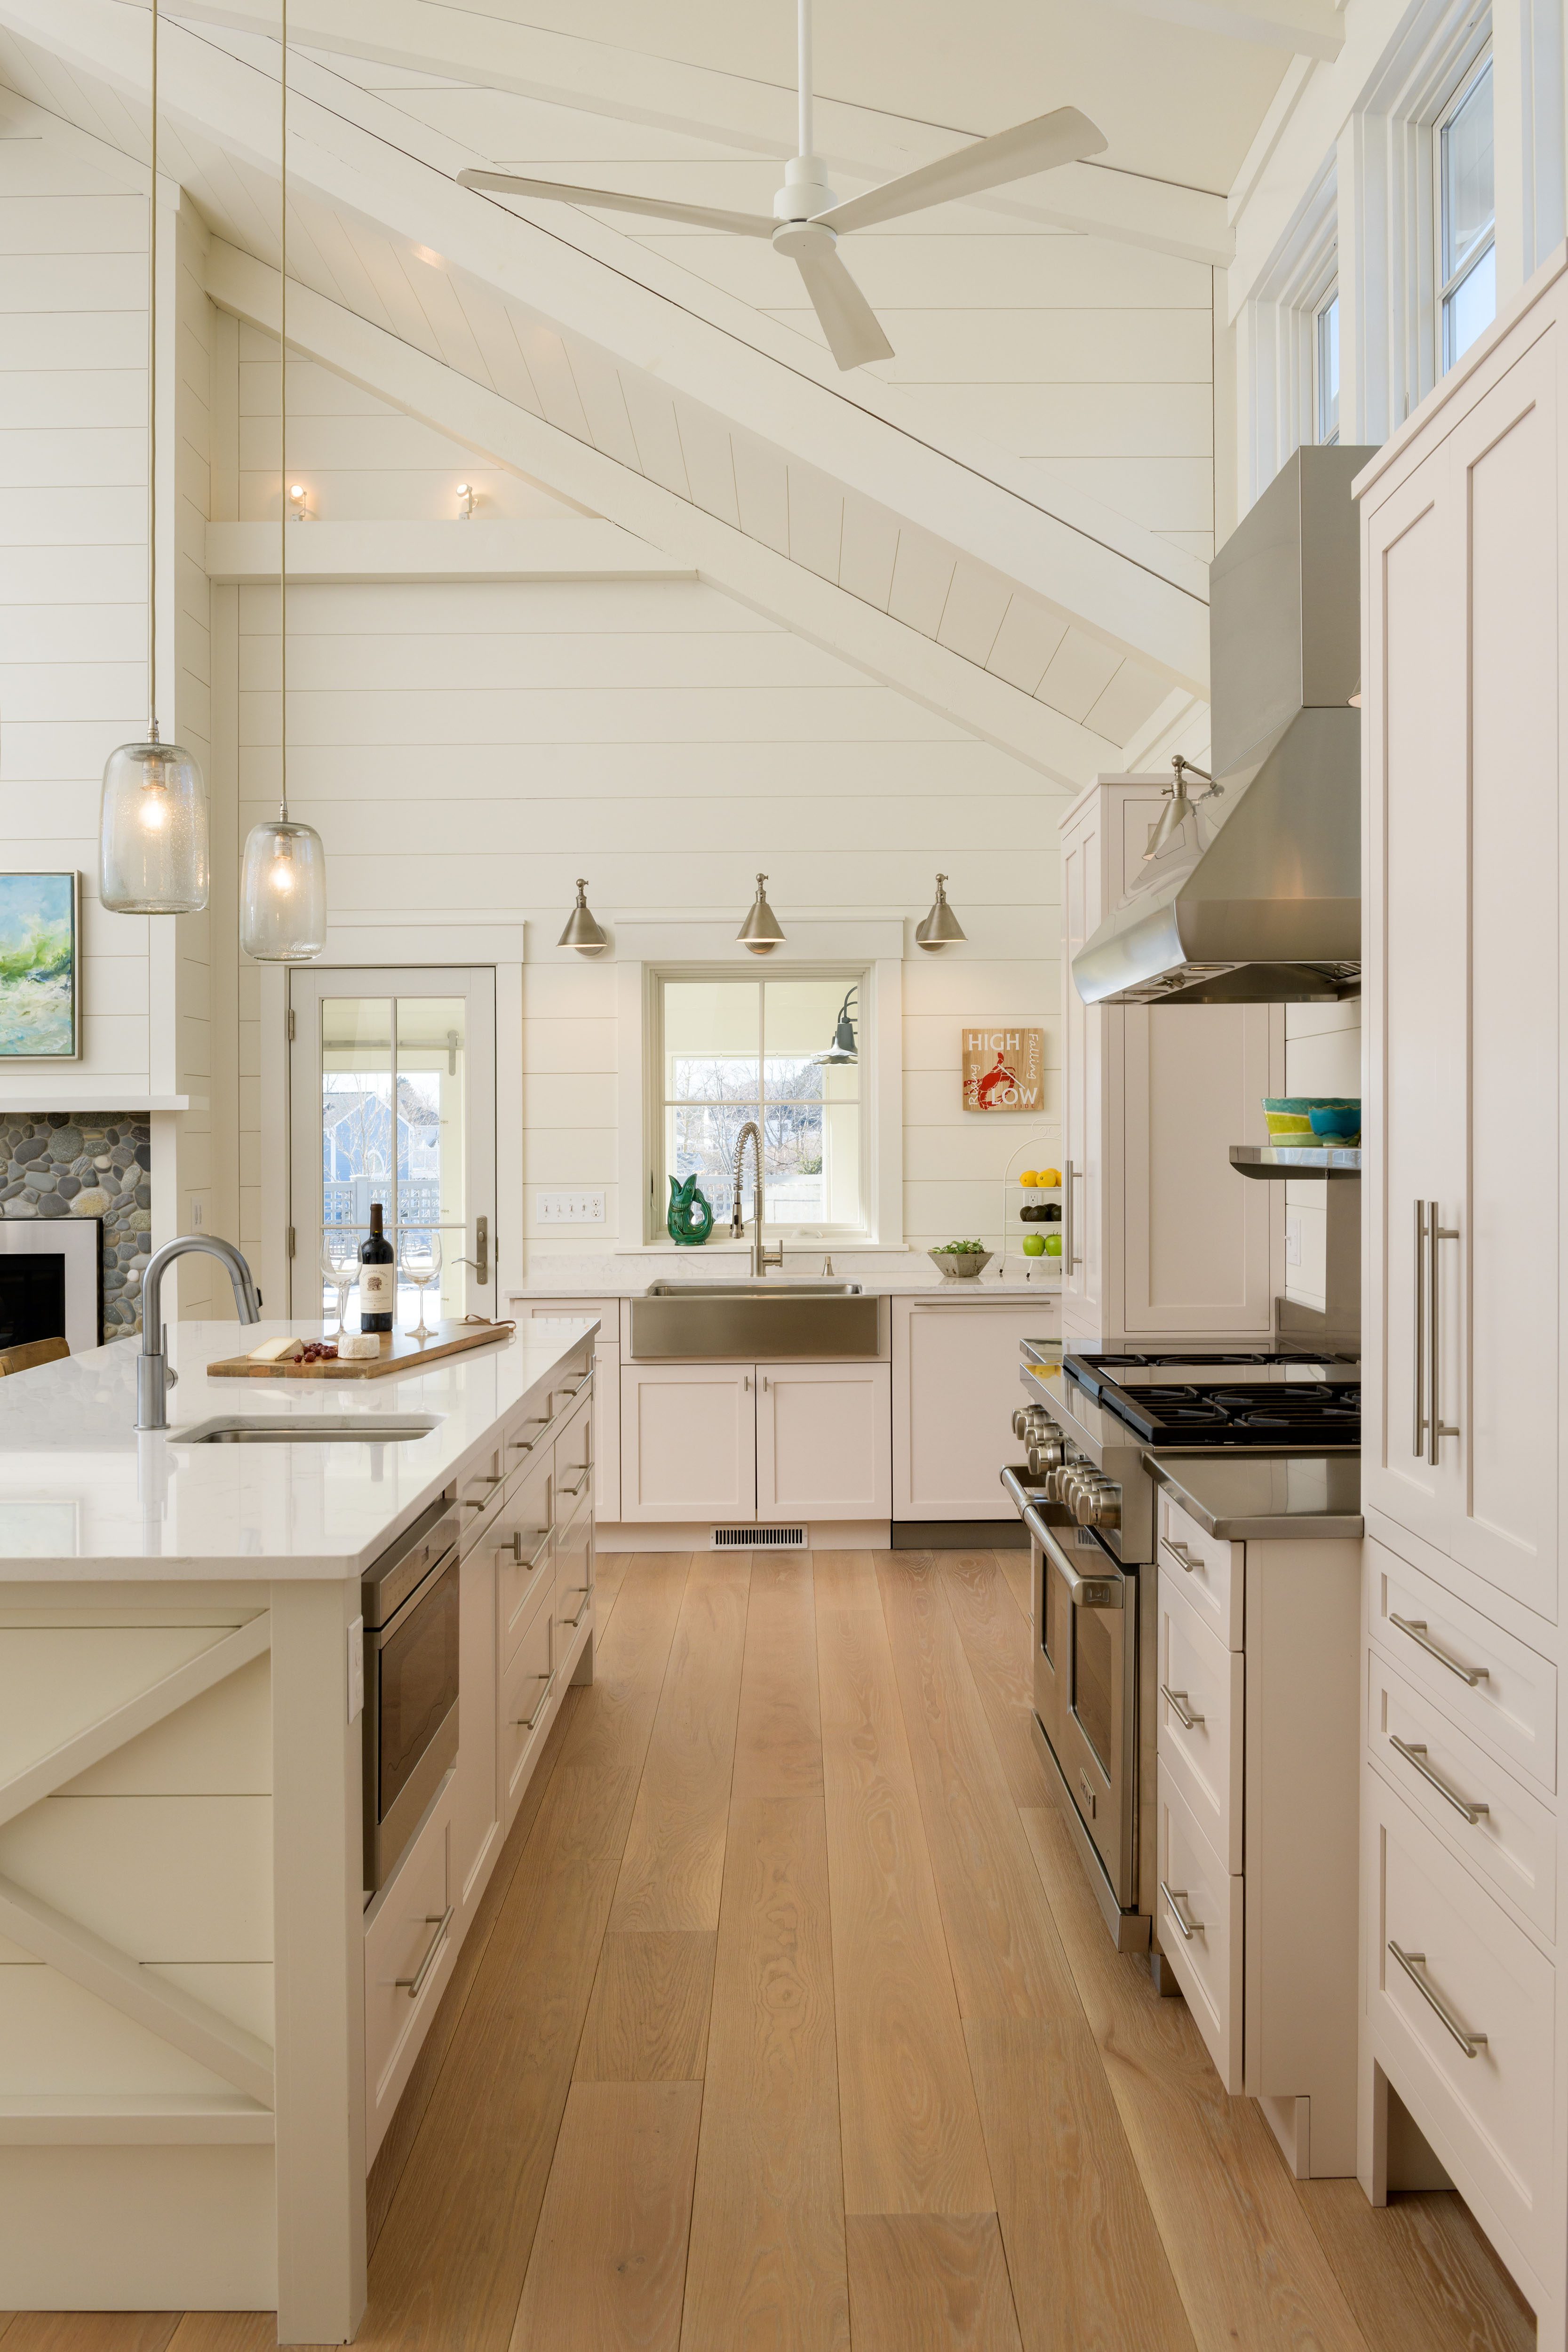 Prefinished White Oak Floors in a Welcoming New Hampshire Kitchen